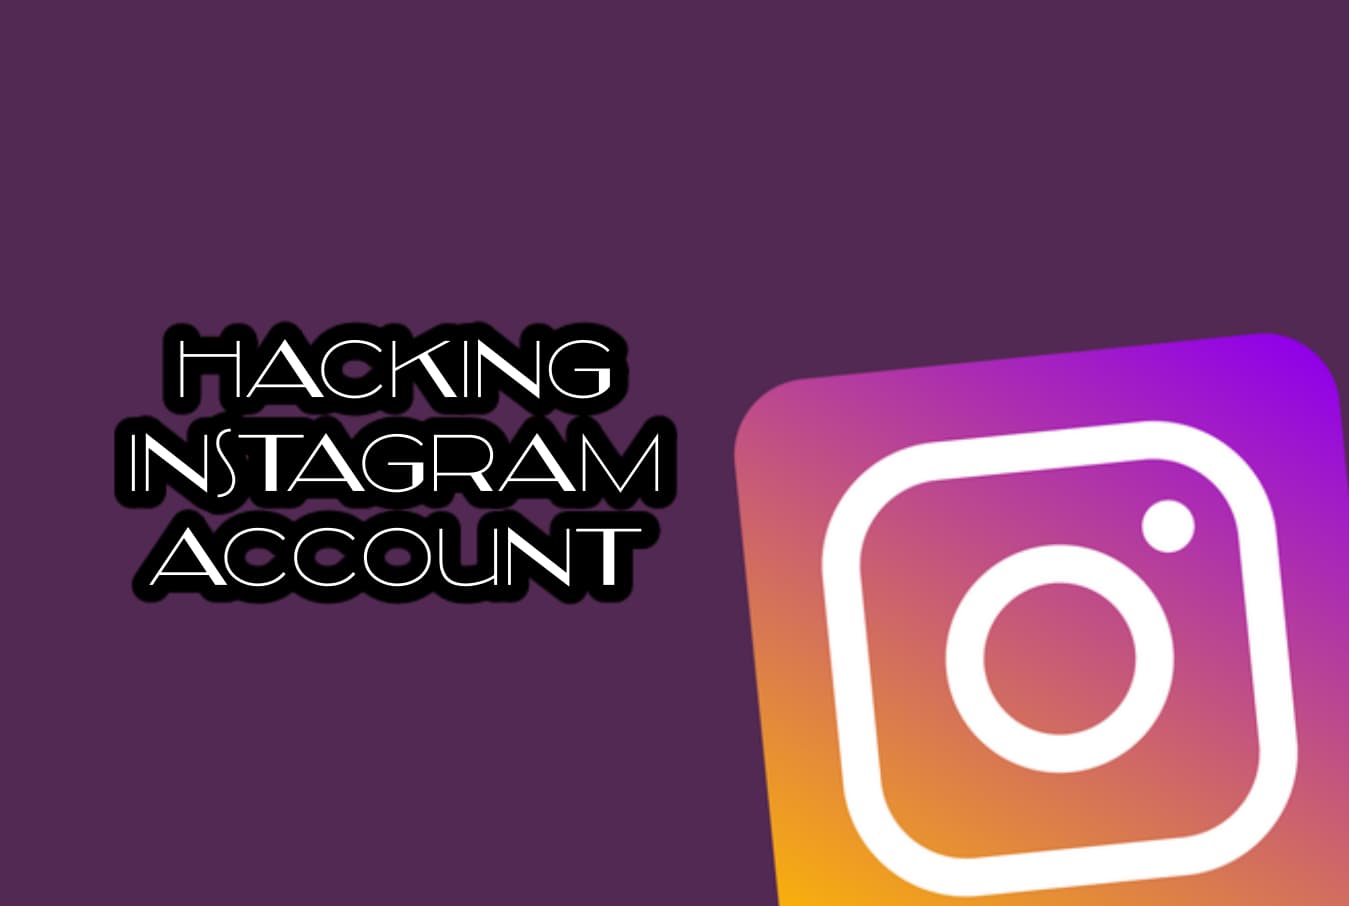 Hacker awarded $30,000 for reporting hack Instagram flaw